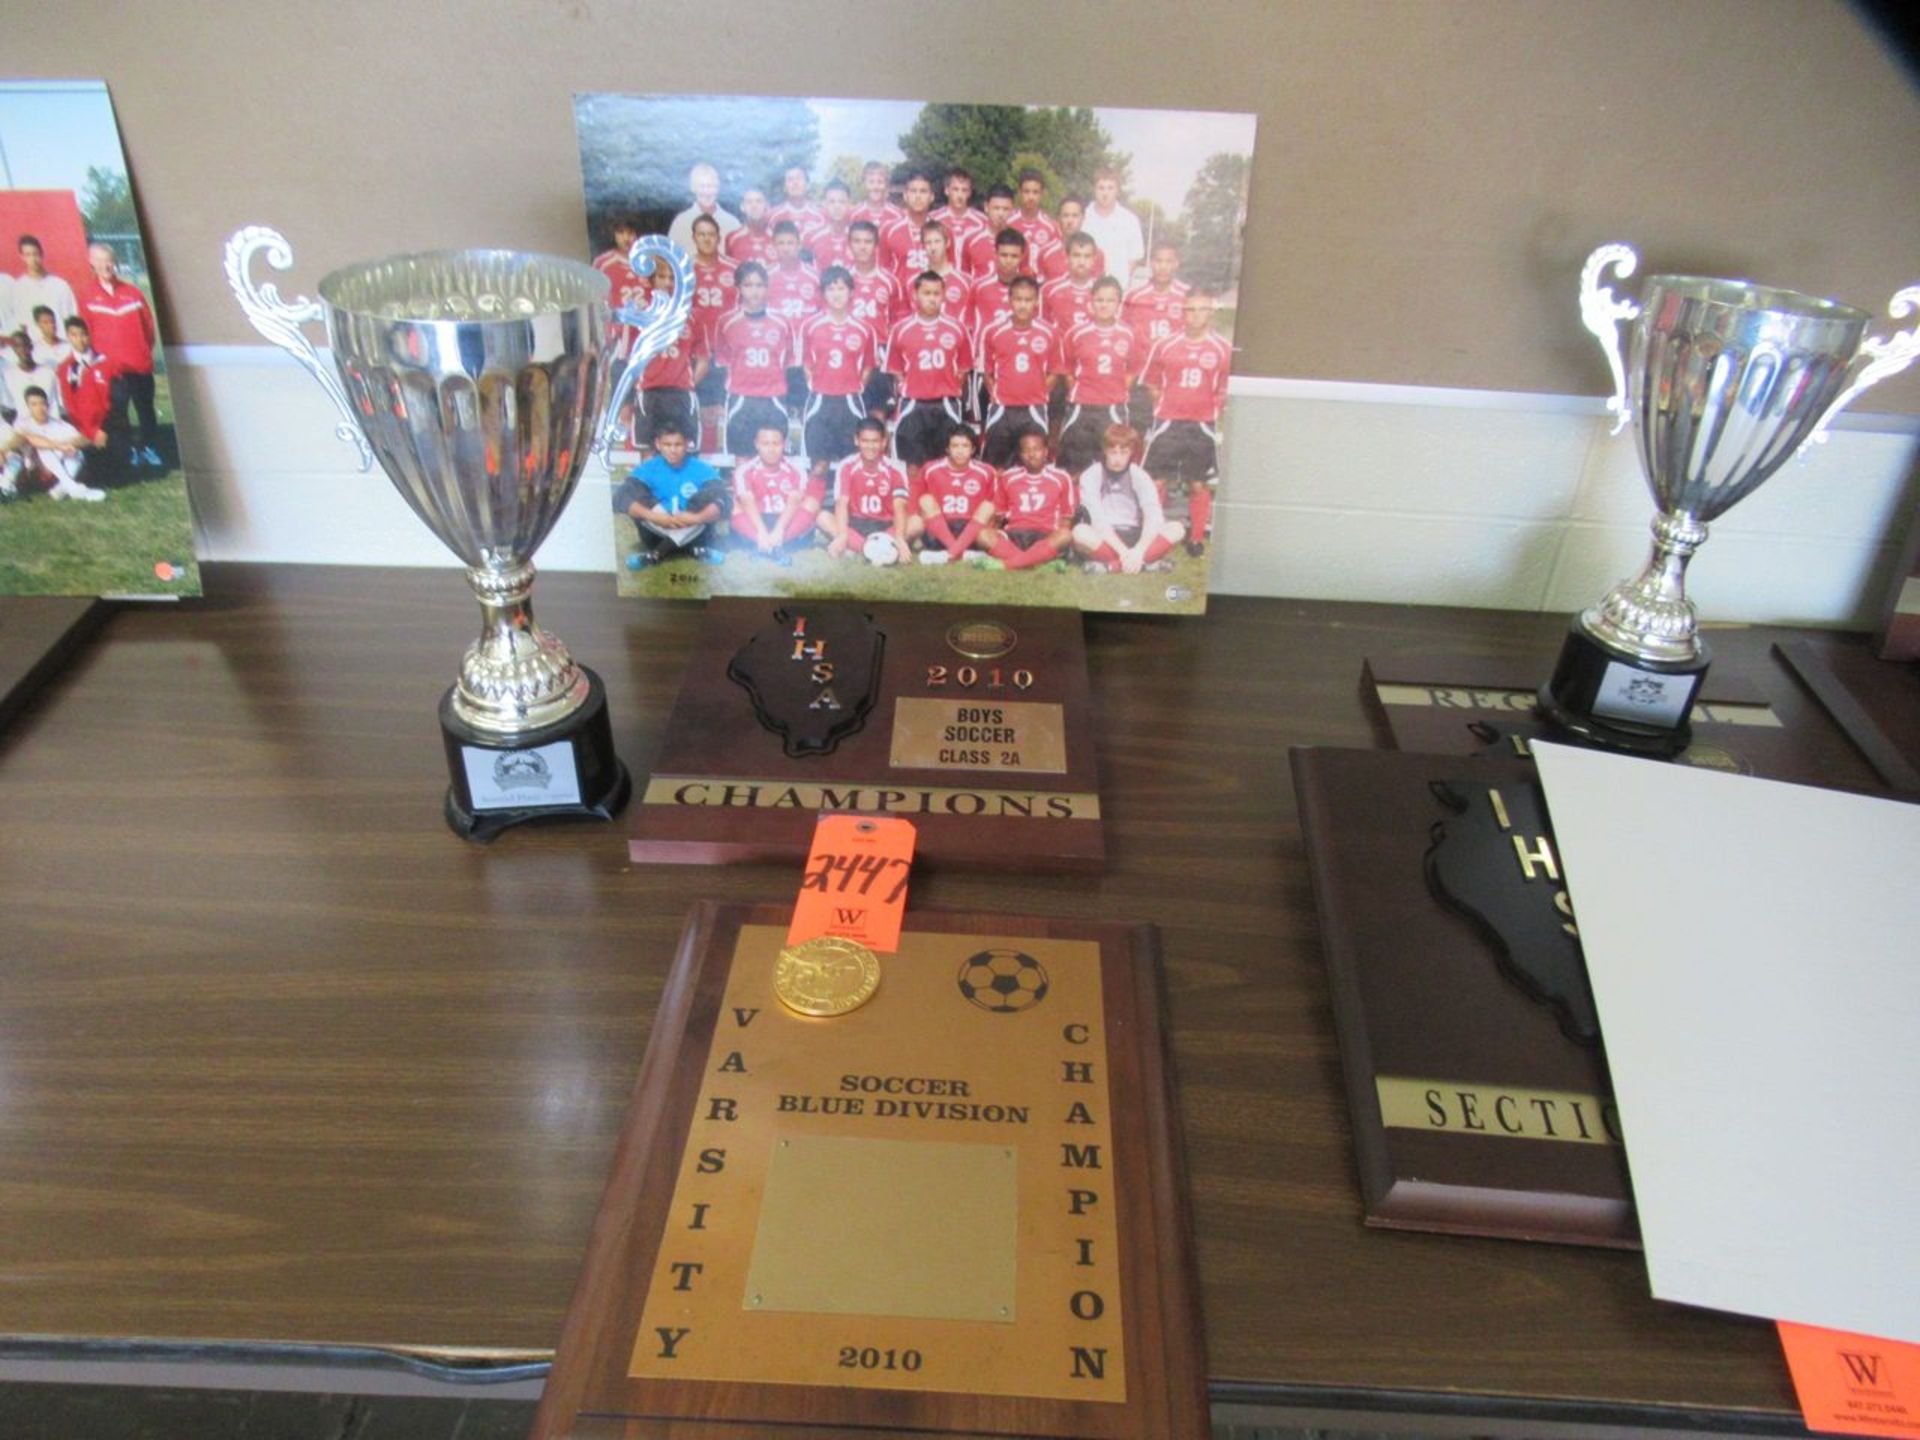 2010 IHSA State Class 2A Regional Champions Plaque, 2010 CCAL Varsity Soccer Blue Division